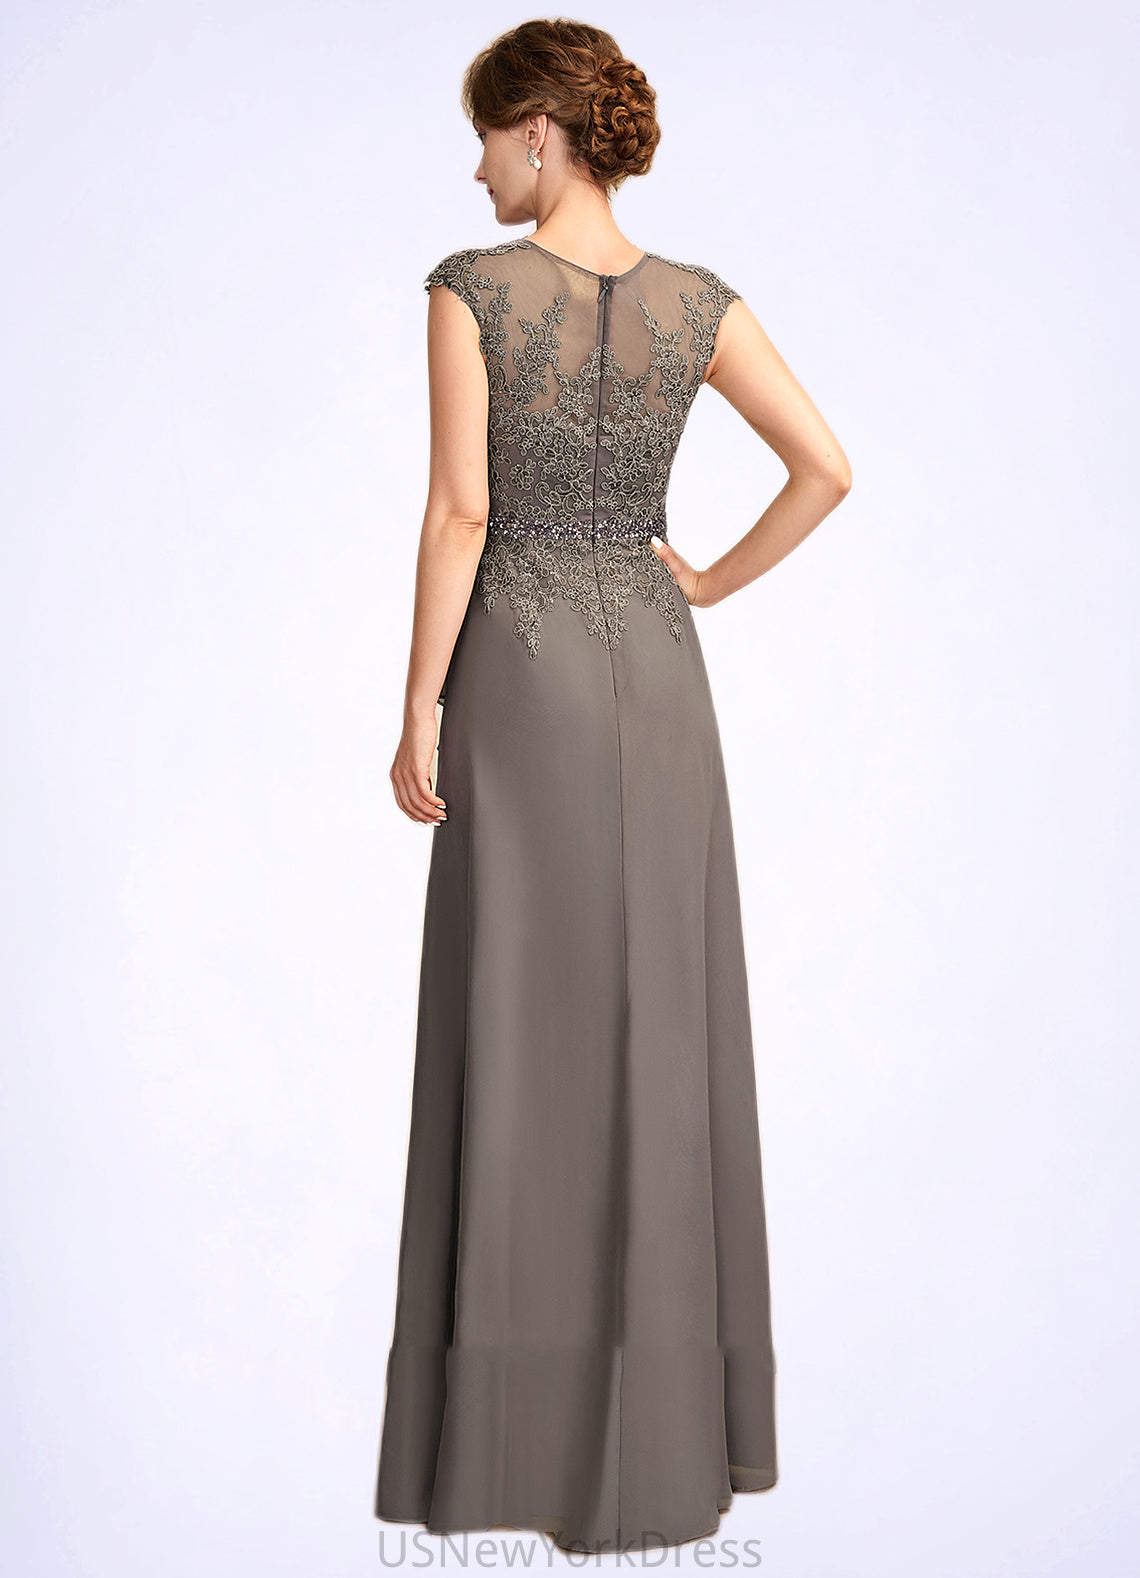 Nataly A-Line V-neck Floor-Length Chiffon Lace Mother of the Bride Dress With Beading Sequins Cascading Ruffles DJ126P0015030